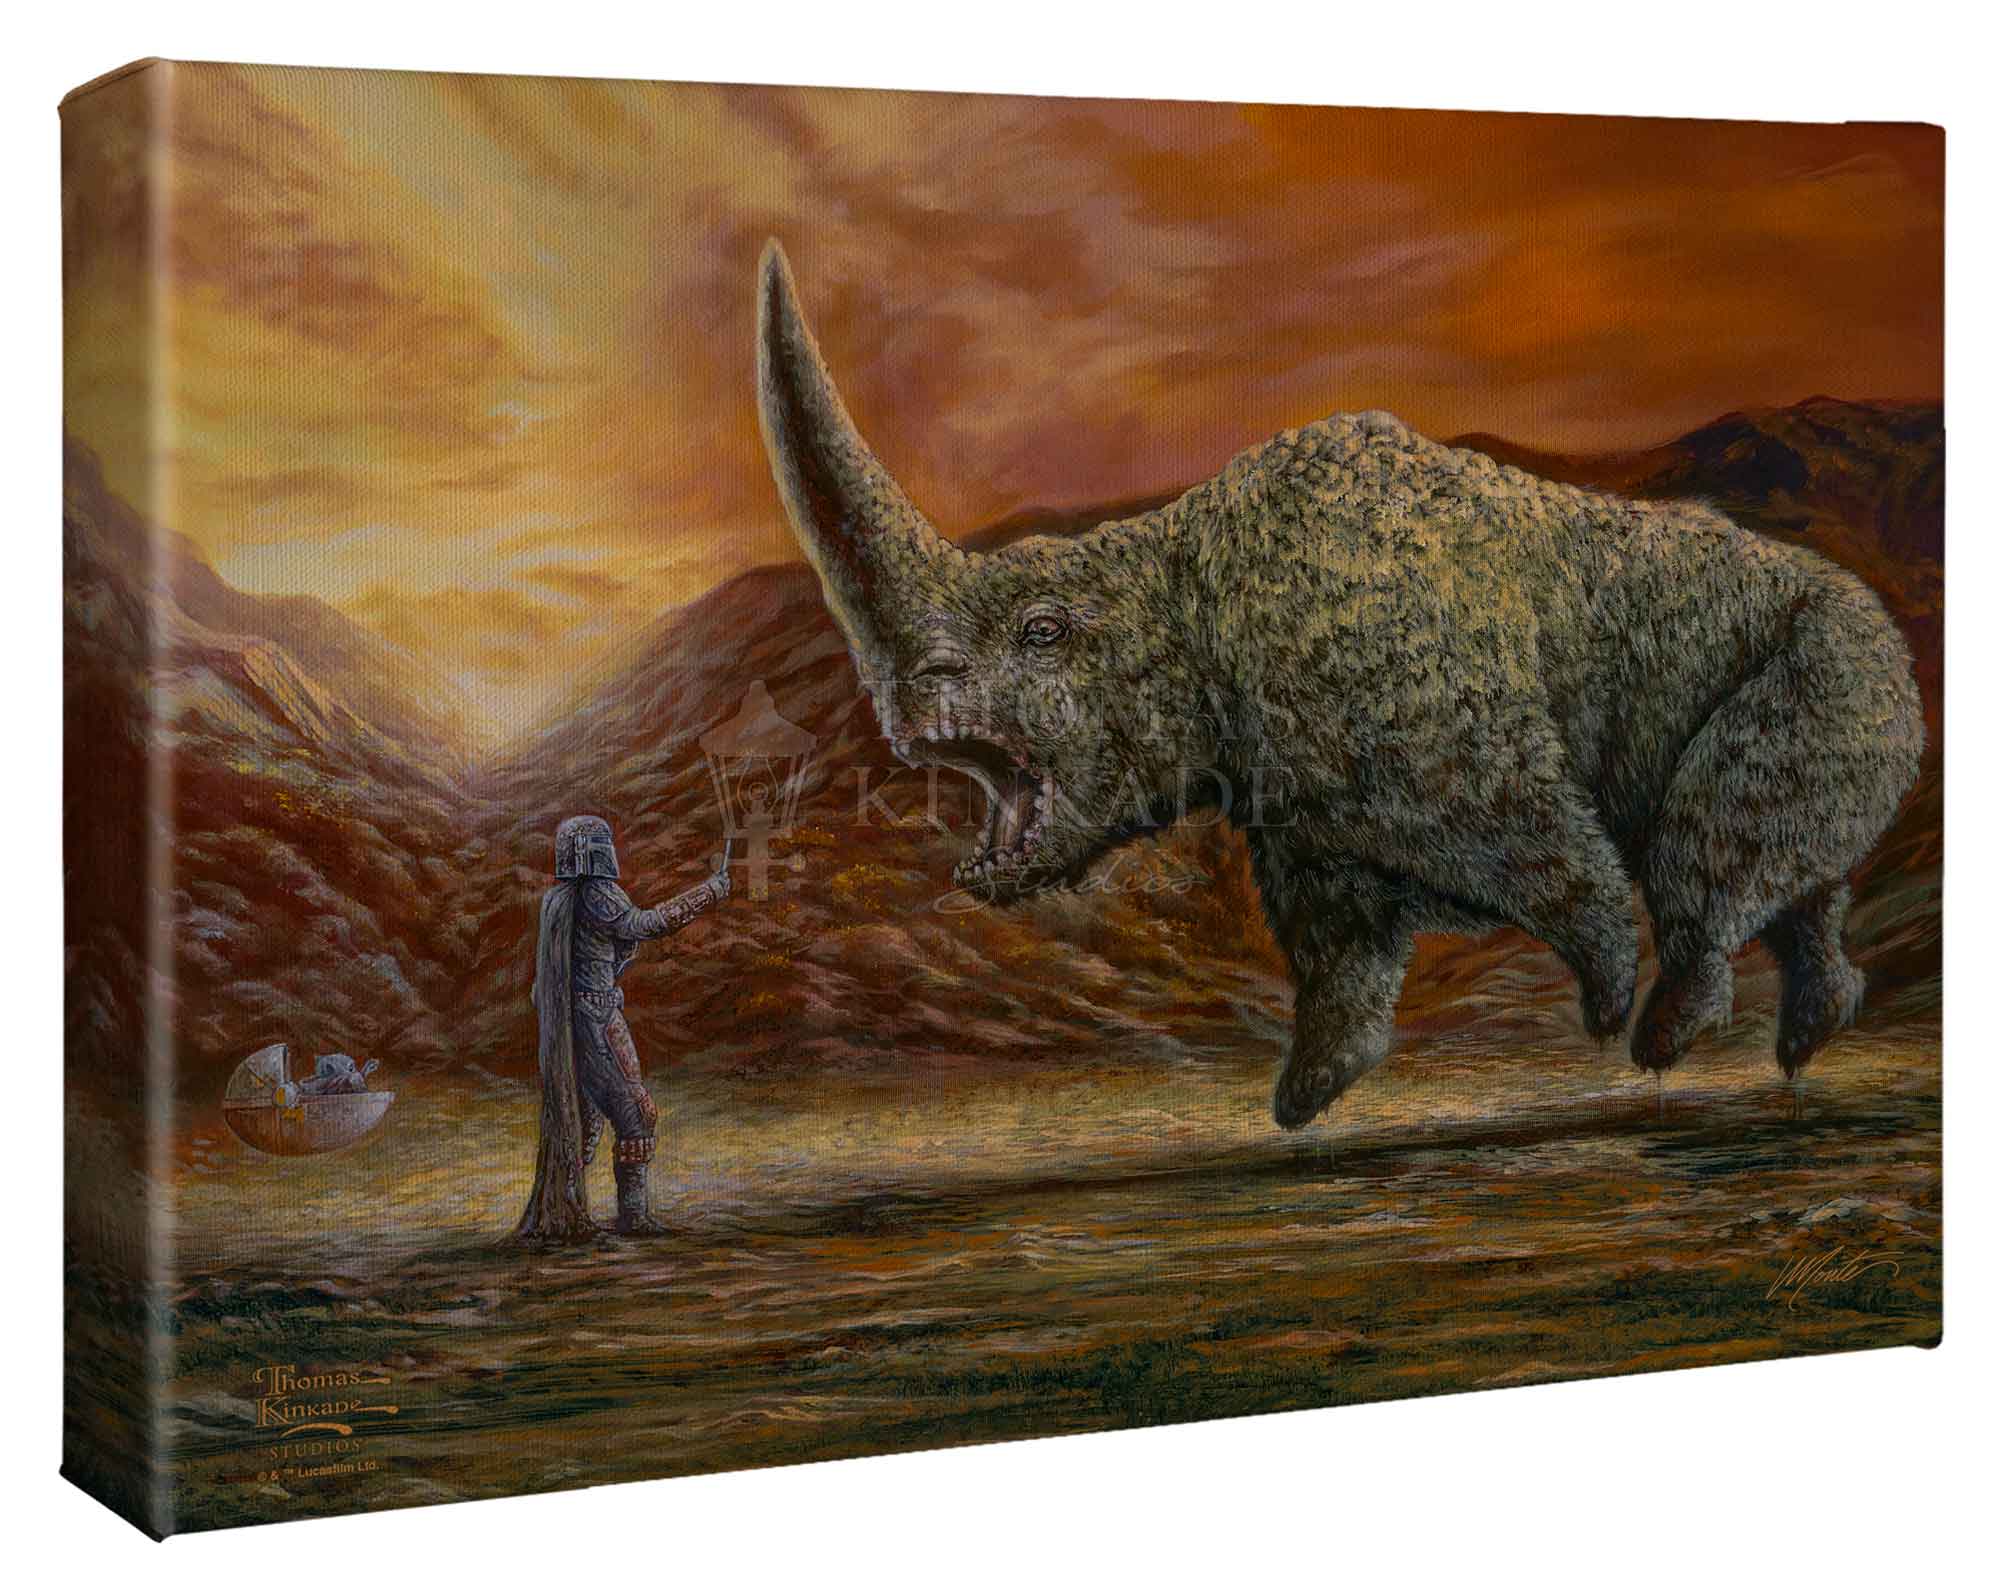 Mando and the Child confronts the Mudhorn beast.  - Gallery Wrap Canvas